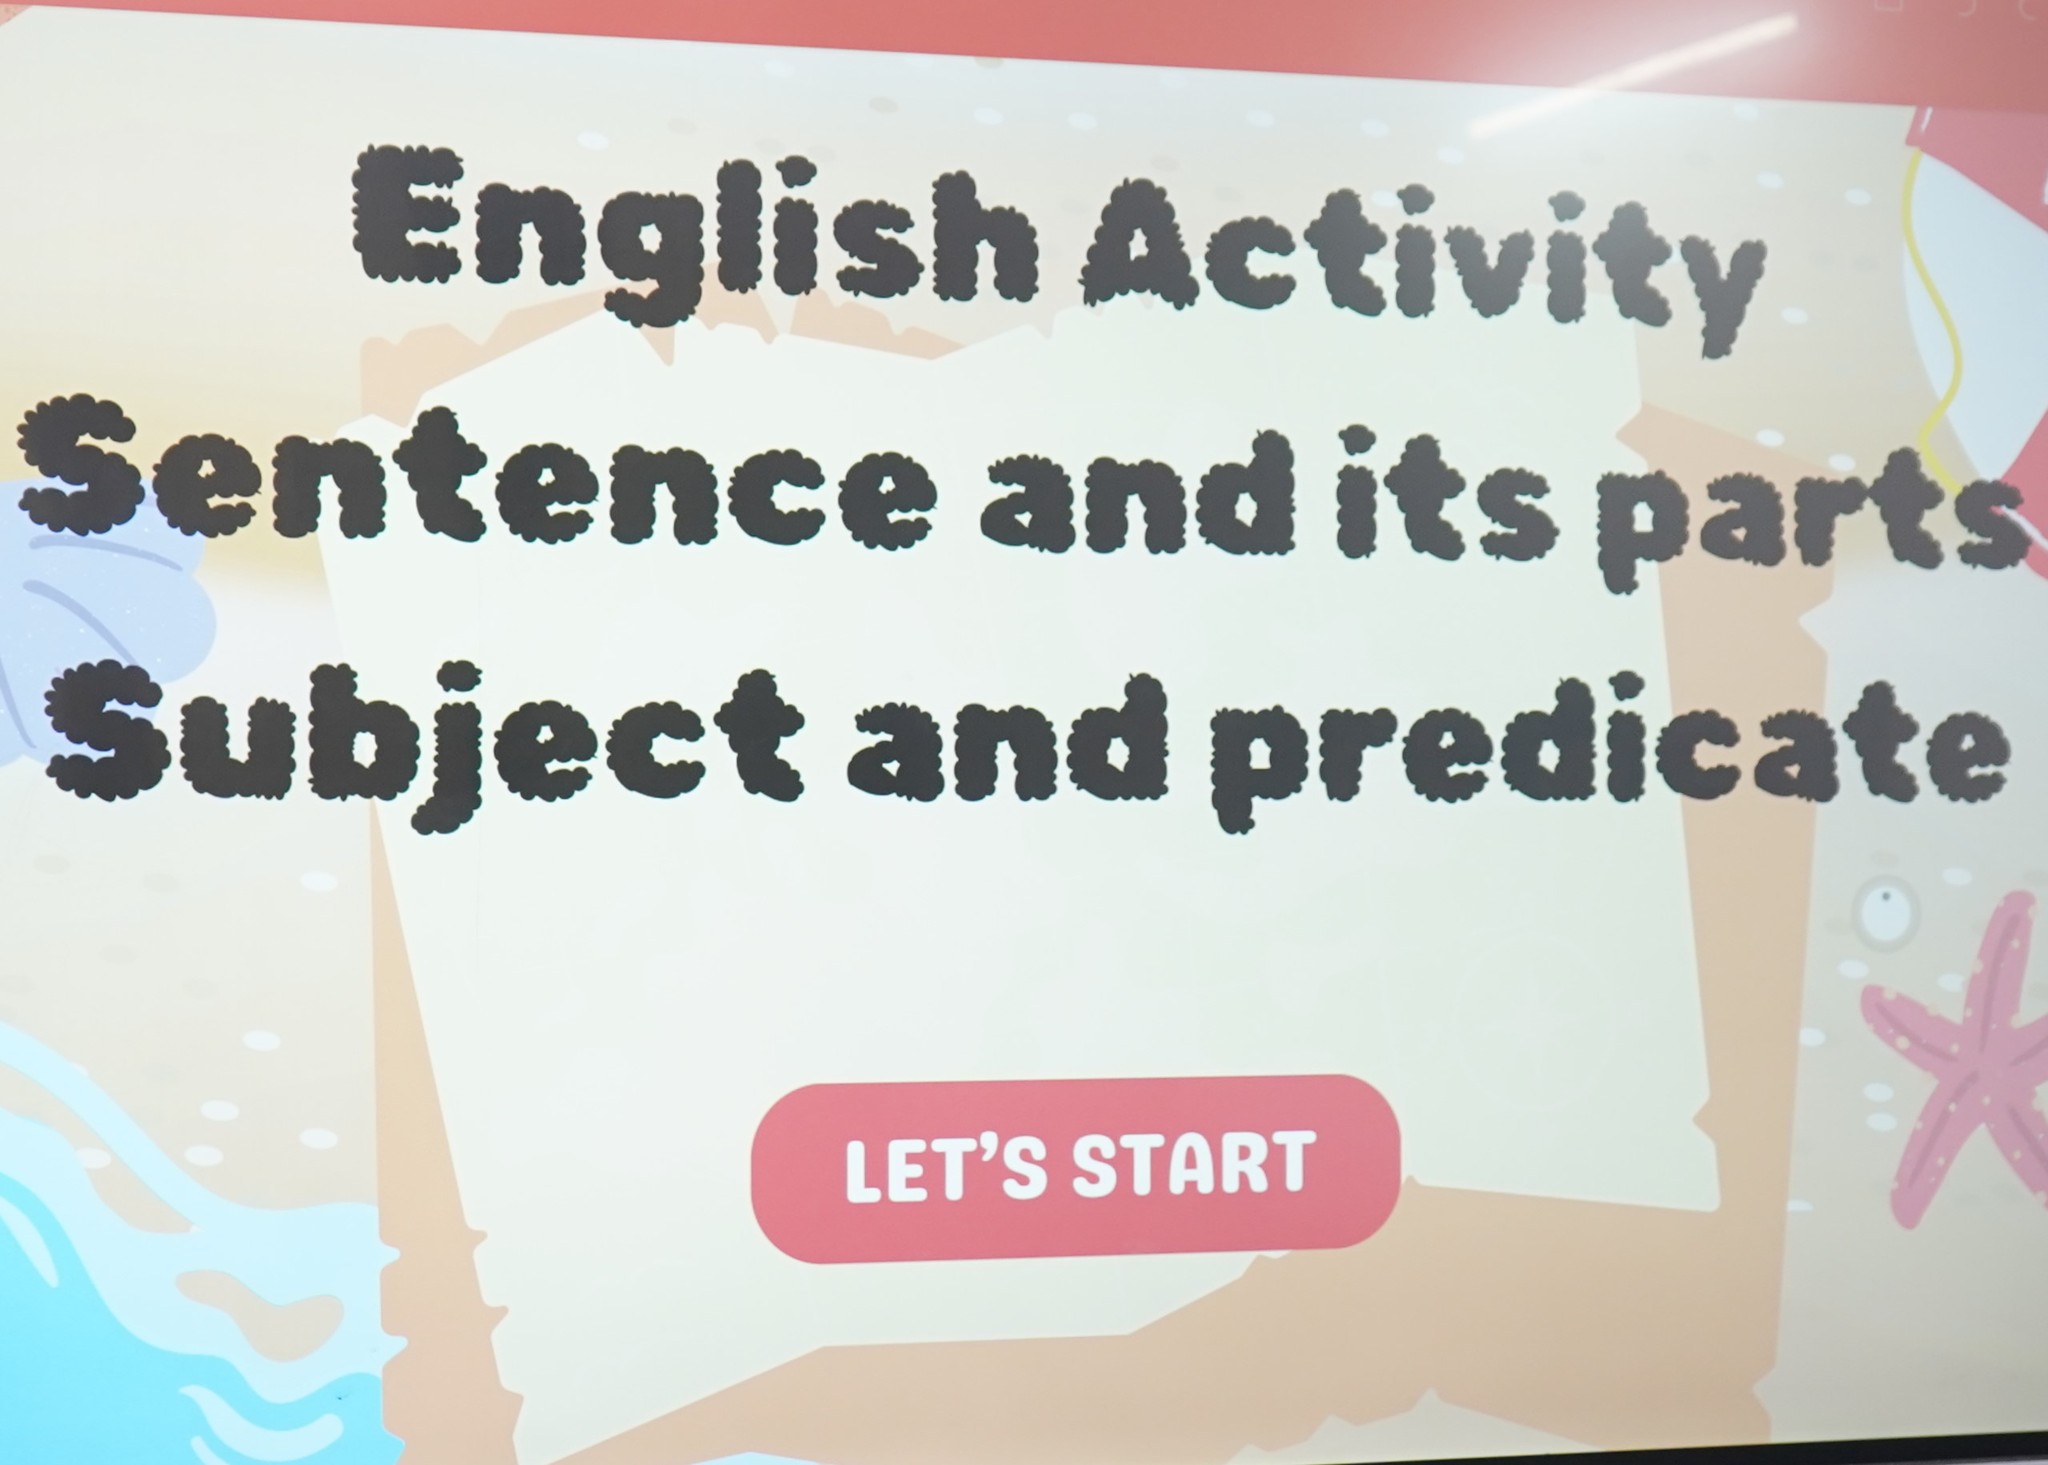 SENTENCE FORMATION ACTIVITY FOR CLASS 4TH